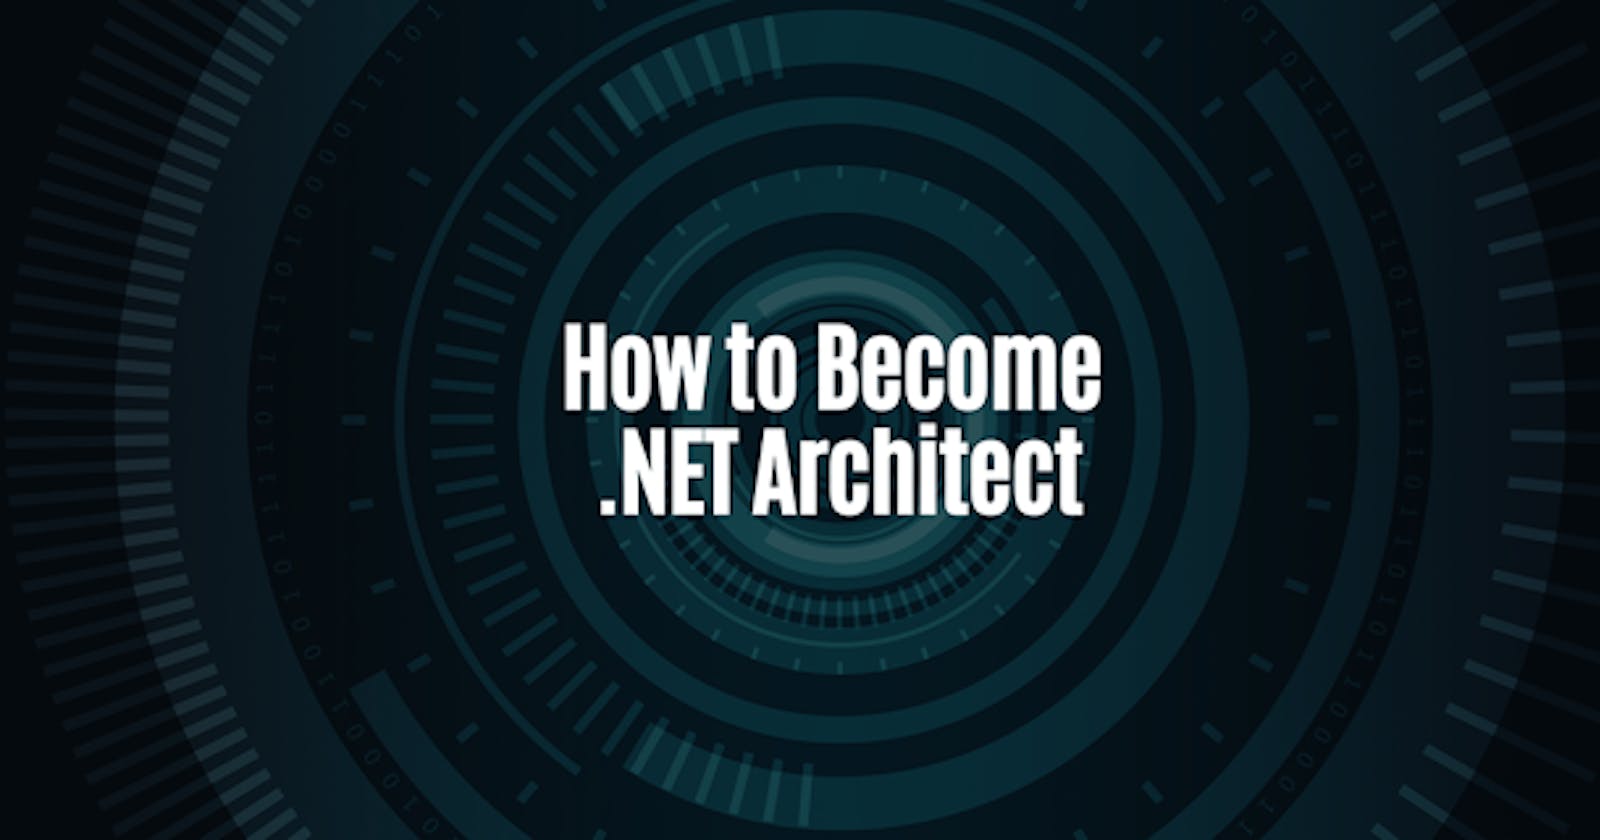 How to Become .NET Architect